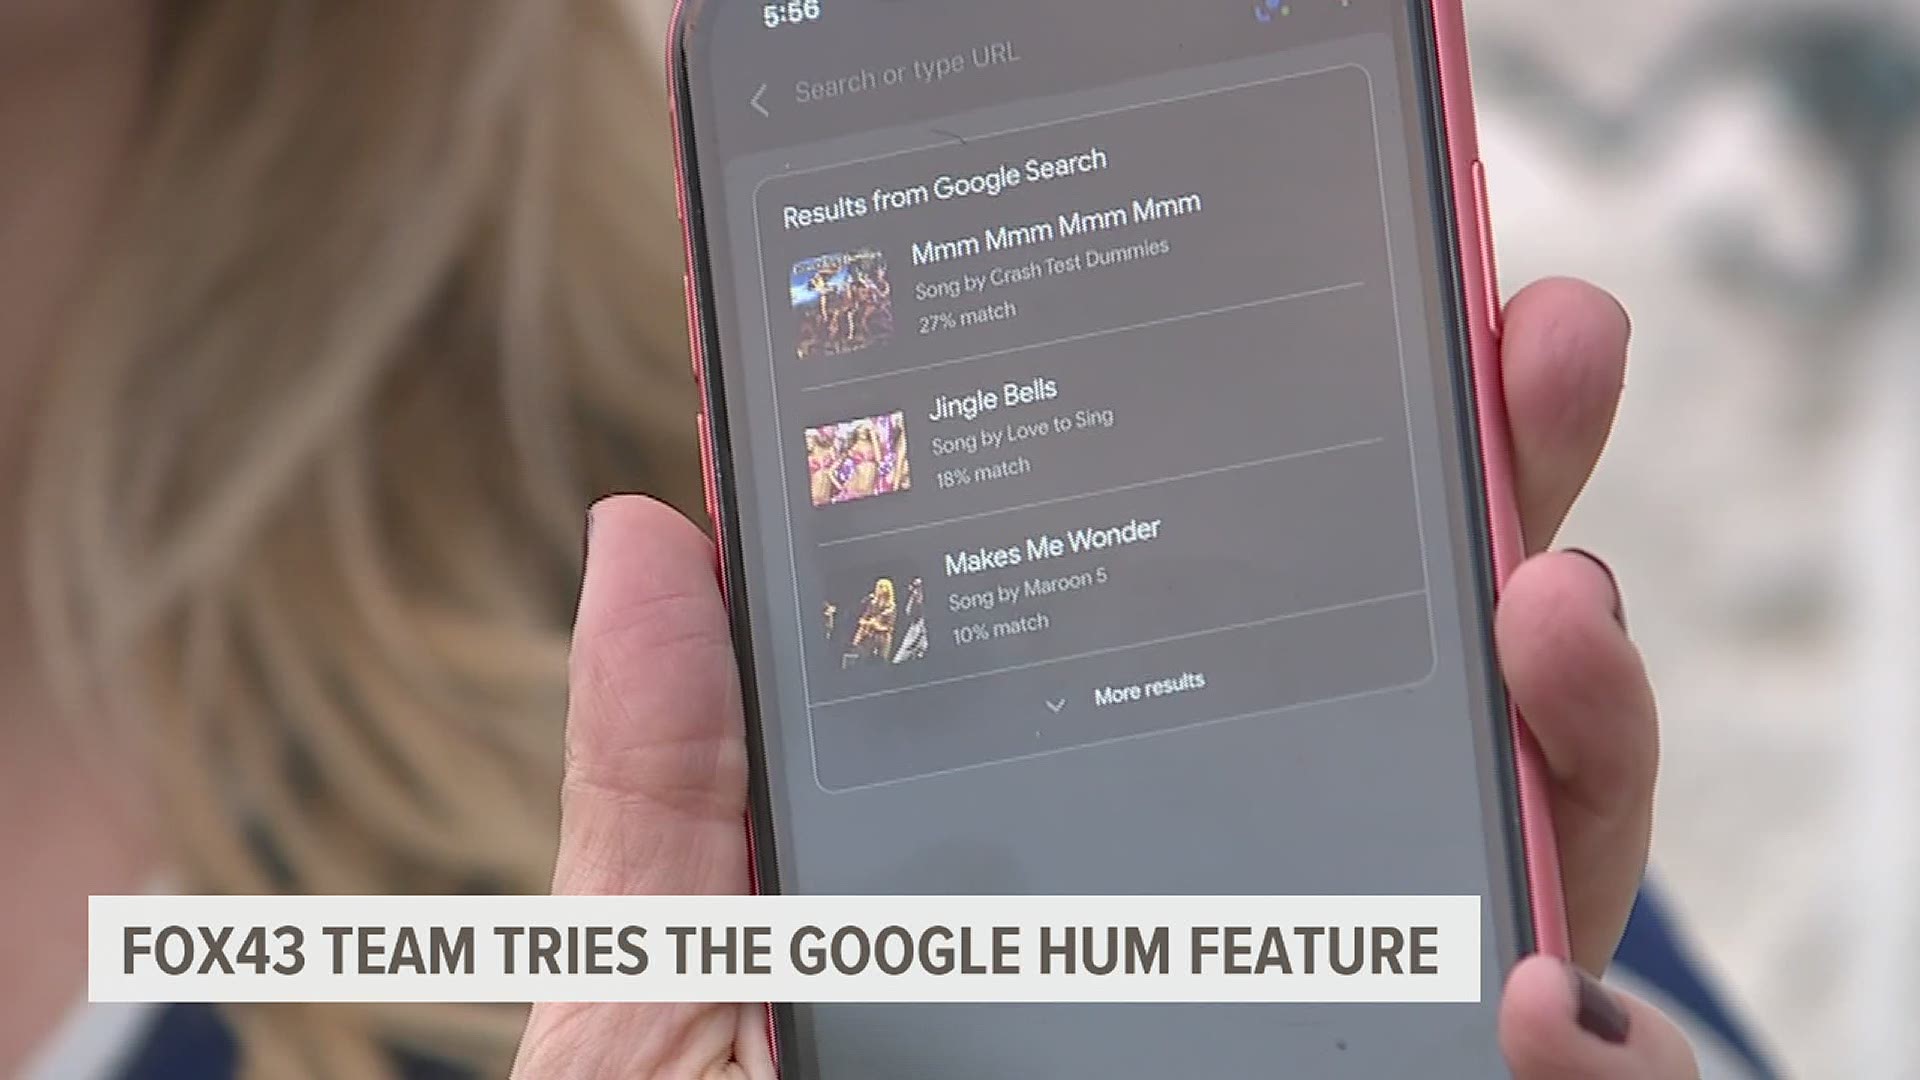 The new feature in the Google App allows users to hum, whistle or sing a melody and the feature identifies which song it is for you.